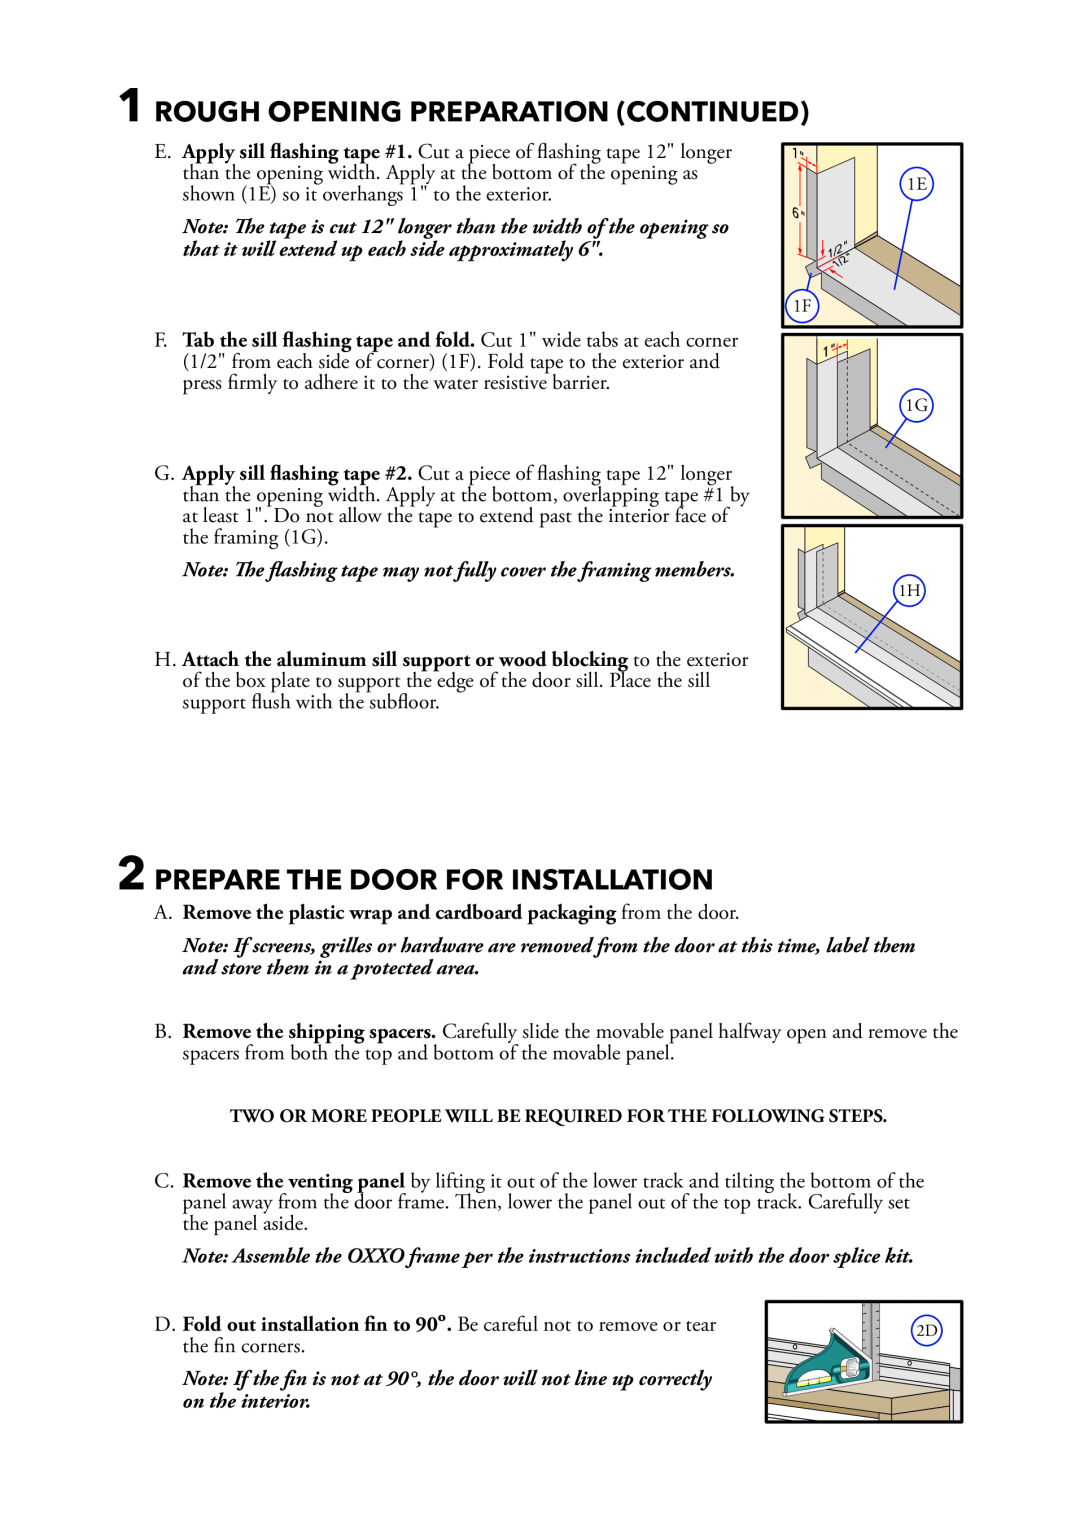 Pella 801W0103 installation instructions Rough Opening Preparation Continued, Prepare The Door For Installation 